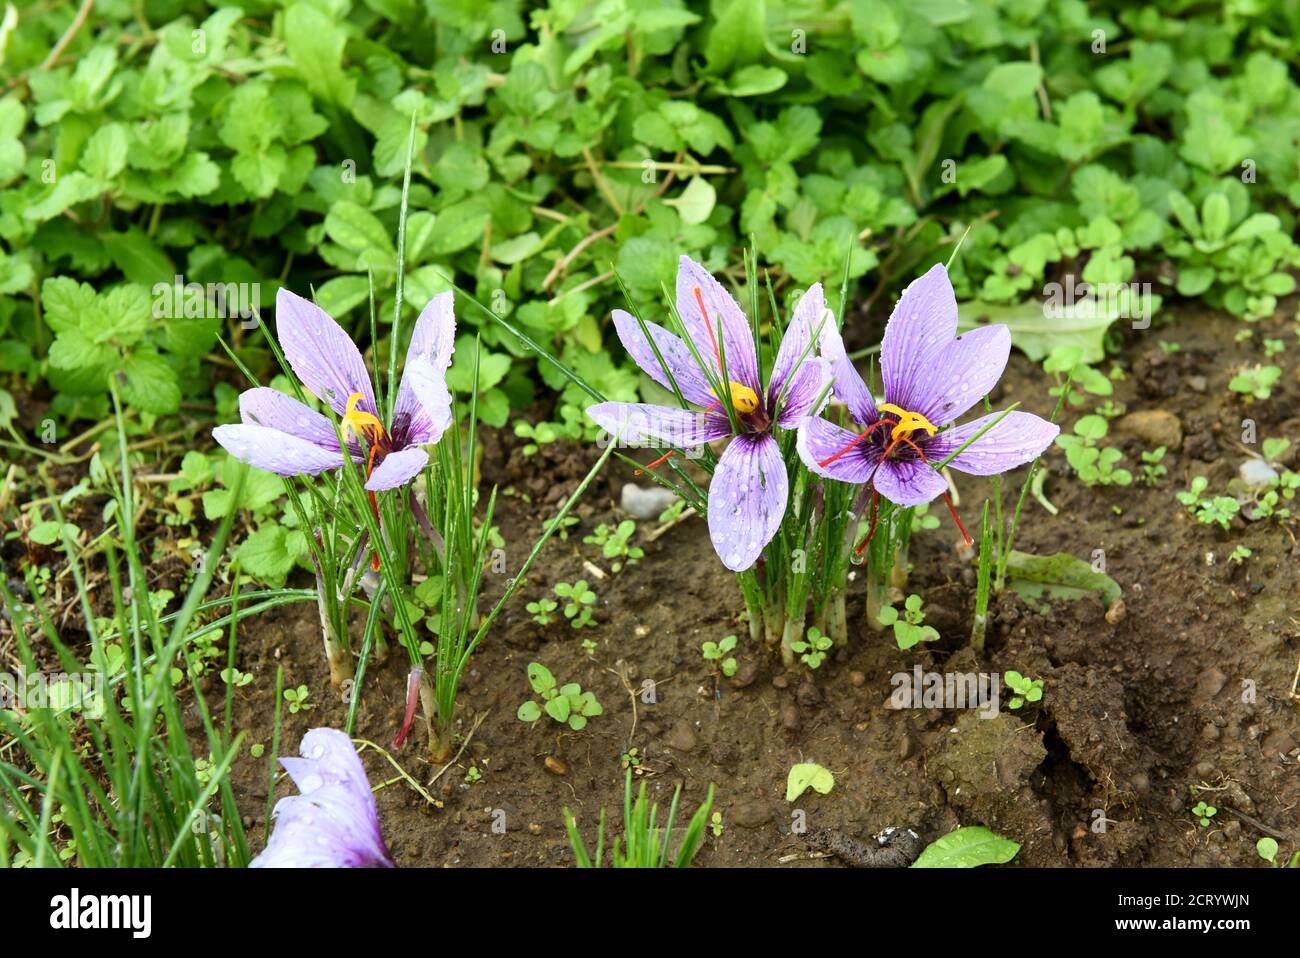 Cluster of purple saffron flowers, Crocus sativus, growing in a field used as a culinary spice for their red filaments Stock Photo